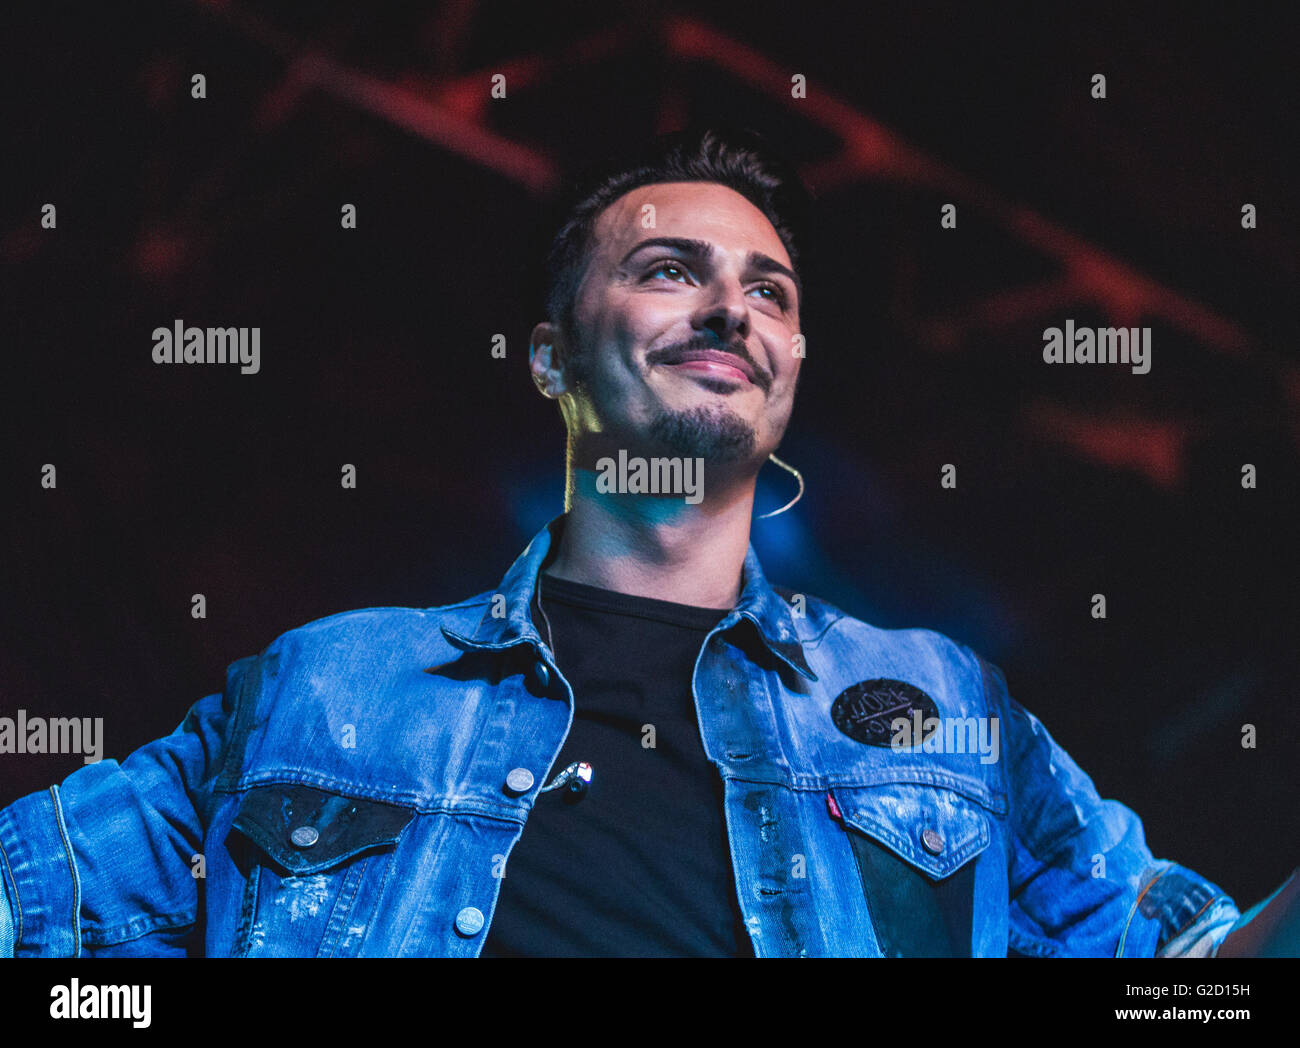 Naples, Italy. 26th May, 2016. Tony Colombo Italian singer originally from Sicily performs at Palapartenope theater napoli for 'SuperConcerto'. The event was attended by many Opsite, including: Monte Francesco, Cecilia & Belen Rodriguez. © Ernesto Vicinanza/Pacific Press/Alamy Live News Stock Photo